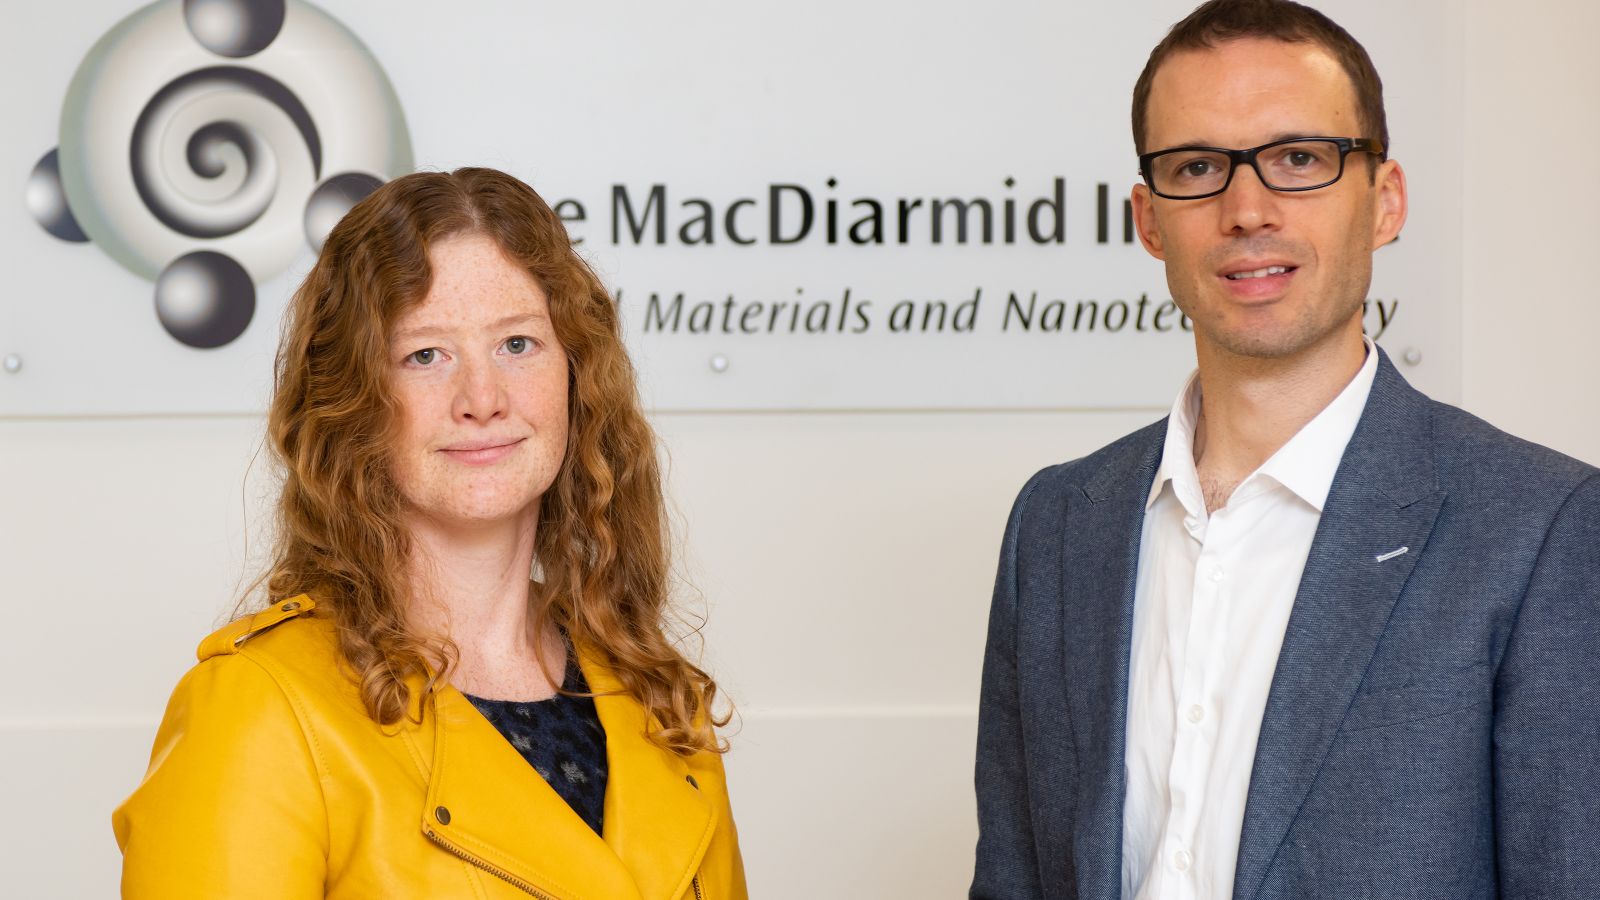 Associate Professor Nicola Gaston and Associate Professor Justin Hodgkiss stand in front of the MacDiarmid Institute name and logo.